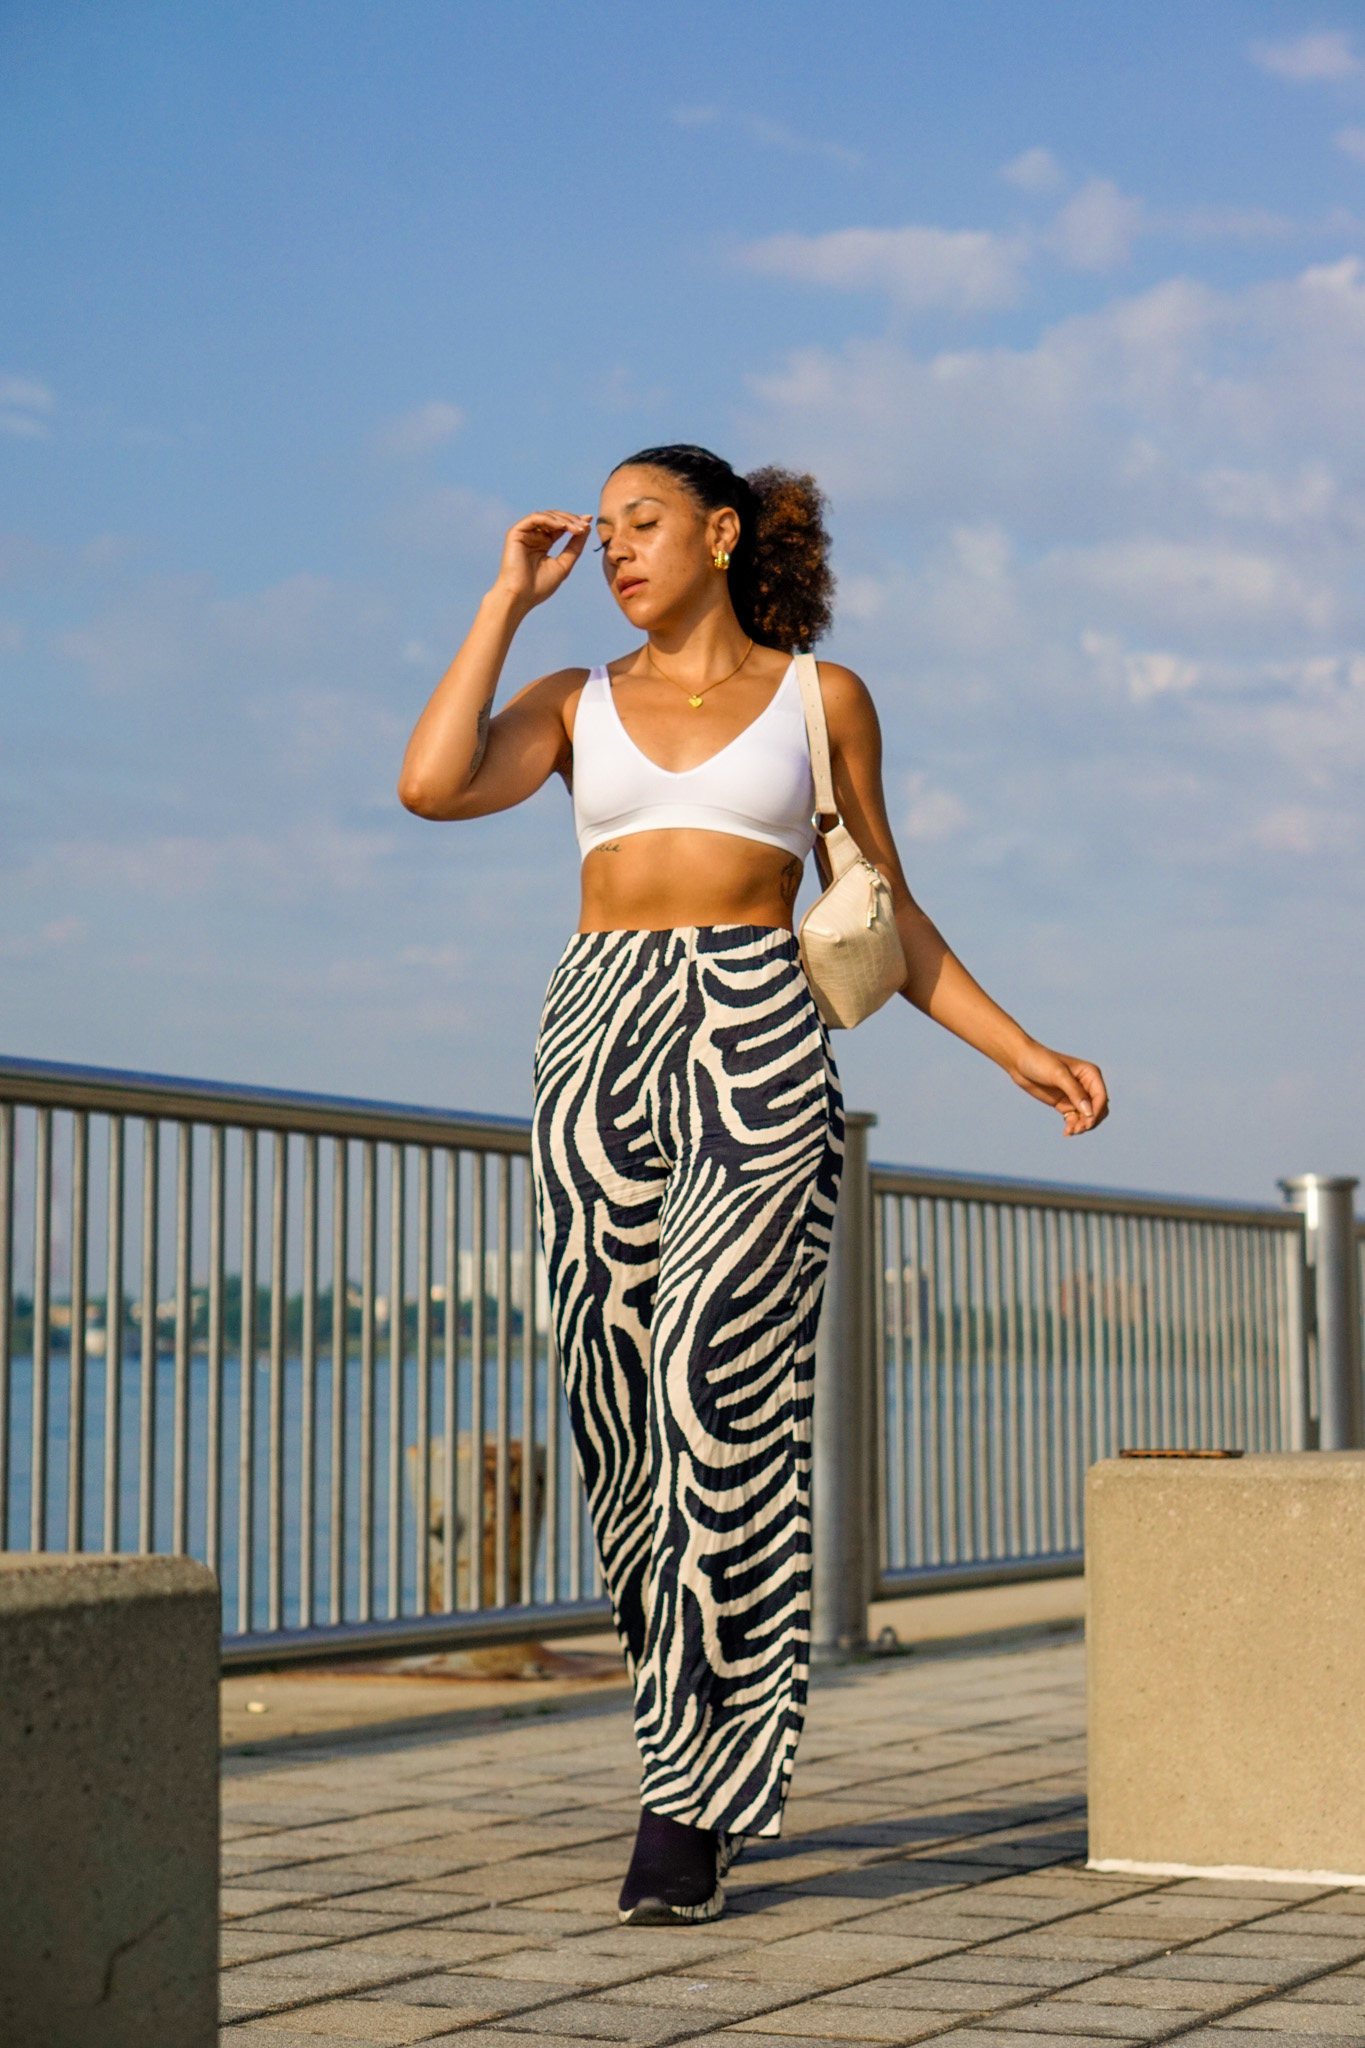 zebra print outfit ideas for pear shaped women, zebra print outfit ideas black girl, zebra print street style outfit, how to style zebra print